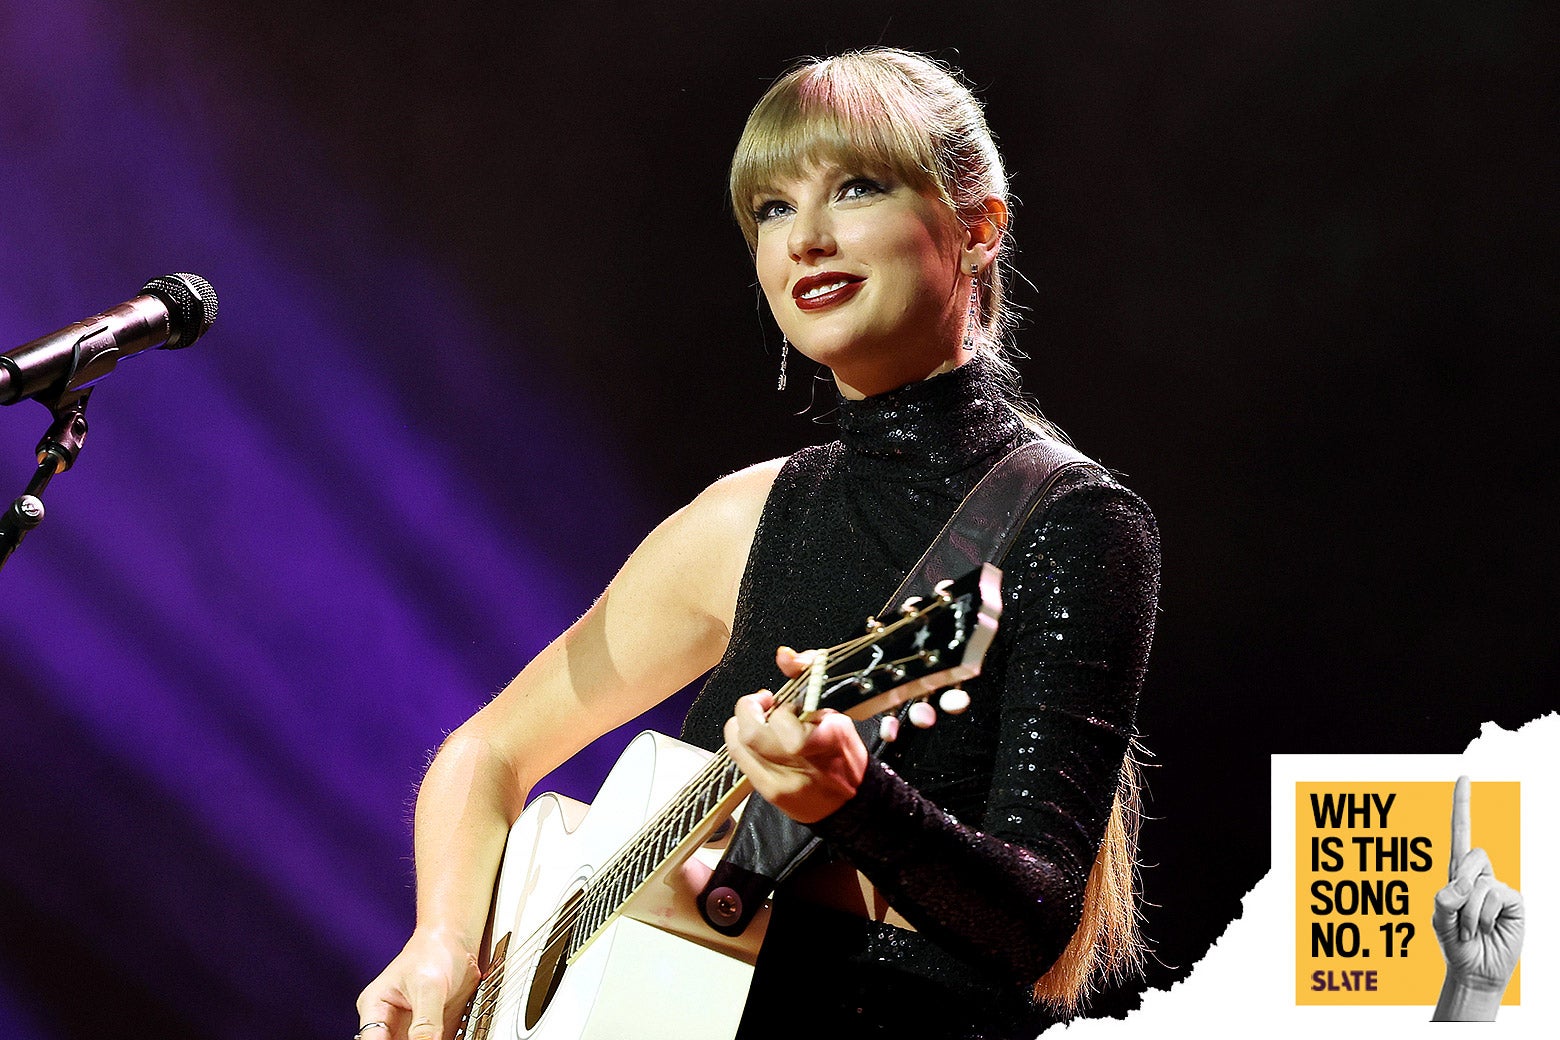 A photo shows Taylor Swift on stage smiling in a sparkly black shirt that has one long sleeve and otherwise shows one totally bare arm. In front of her, a white acoustic guitar, a microphone, and—photoshopped in the corner—a logo says "Why Is This Song No. 1?" with a little hand making the sign for the number 1